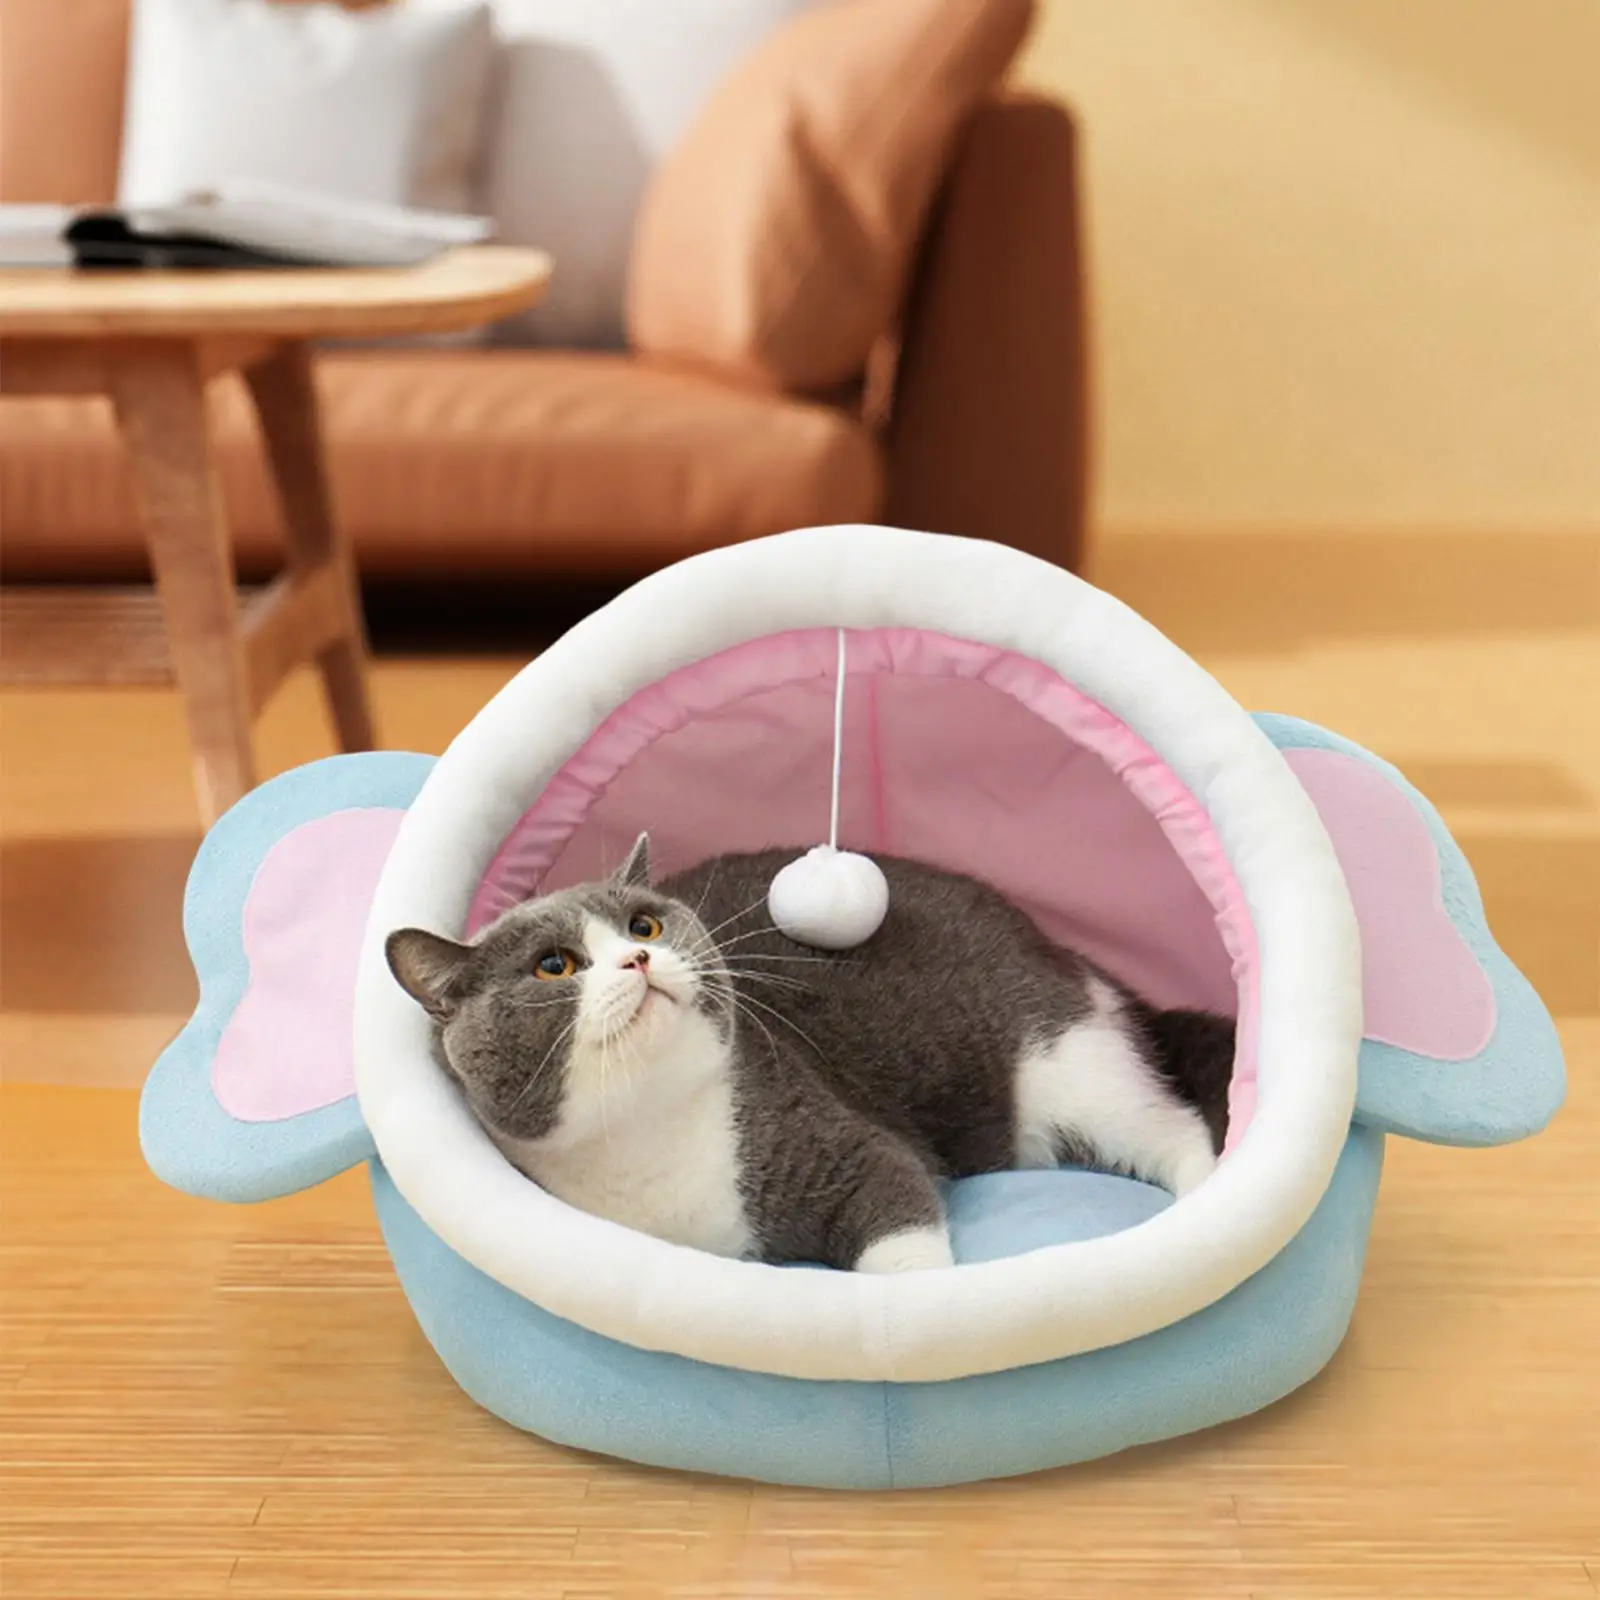 Semi Enclosed Cat Bed Pet Tent Cave Cat House Hut Kennel Small Dog Bed Kitten Bed Cute for Indoor Comfortable Soft Washable Warm